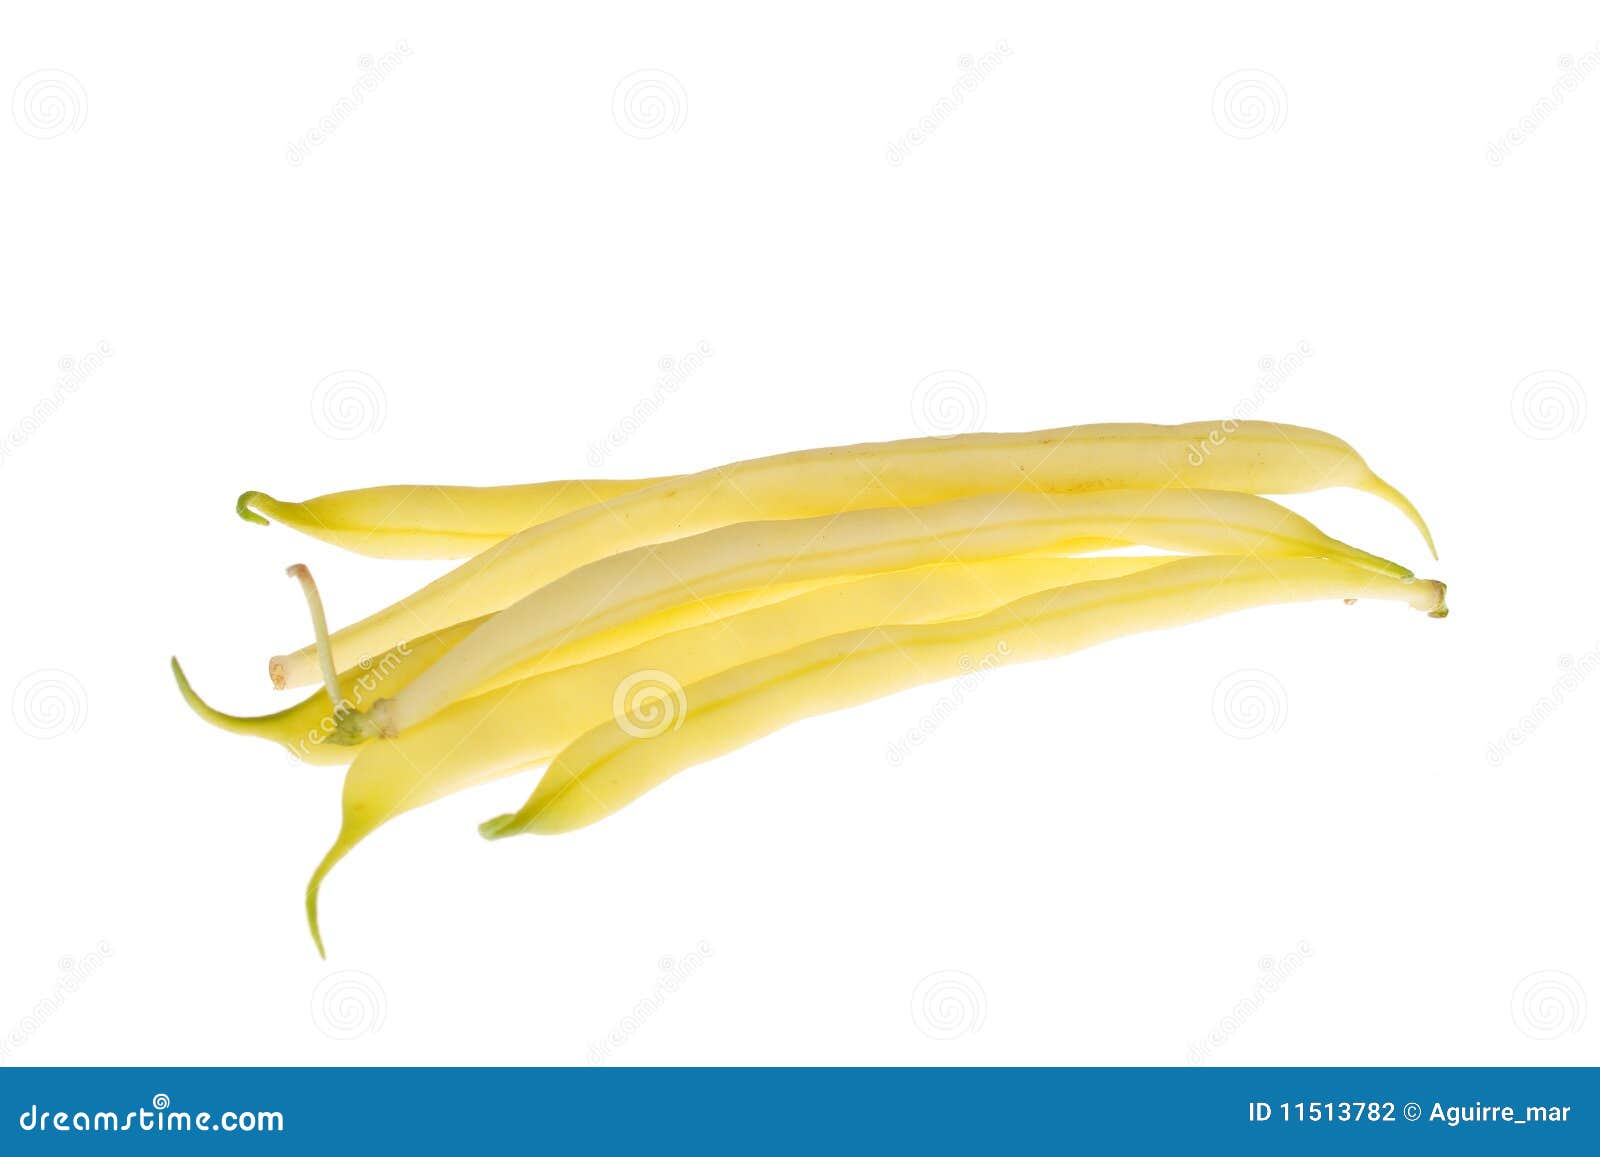 Yellow String Beans stock photo. Image of gourmet, flavor - 11513782